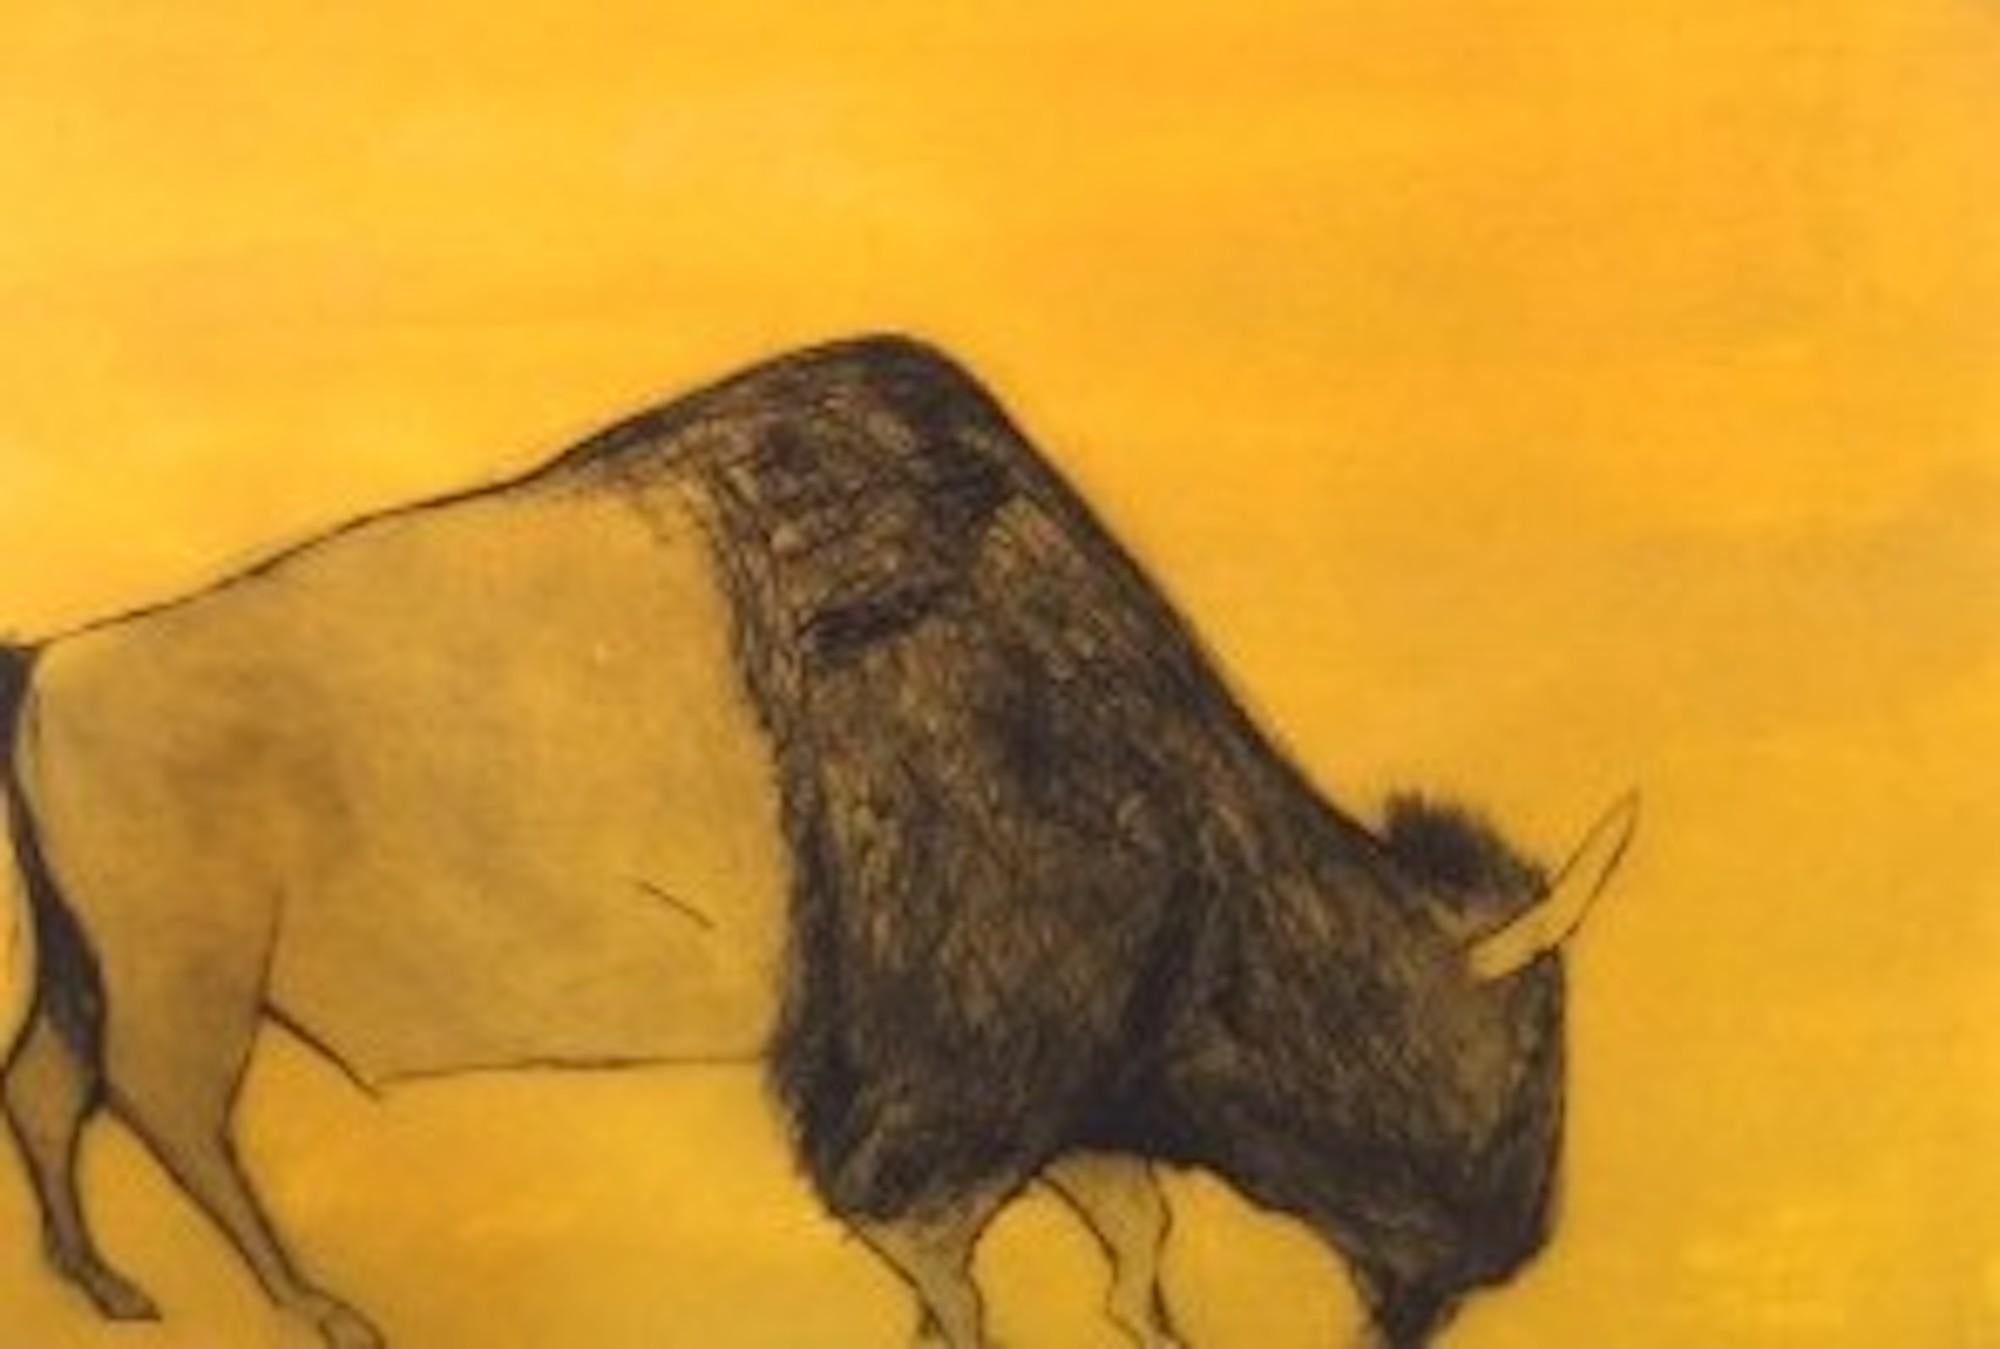 I feel like an African Prince, limited edition print, bison print - Contemporary Print by Kate Boxer 